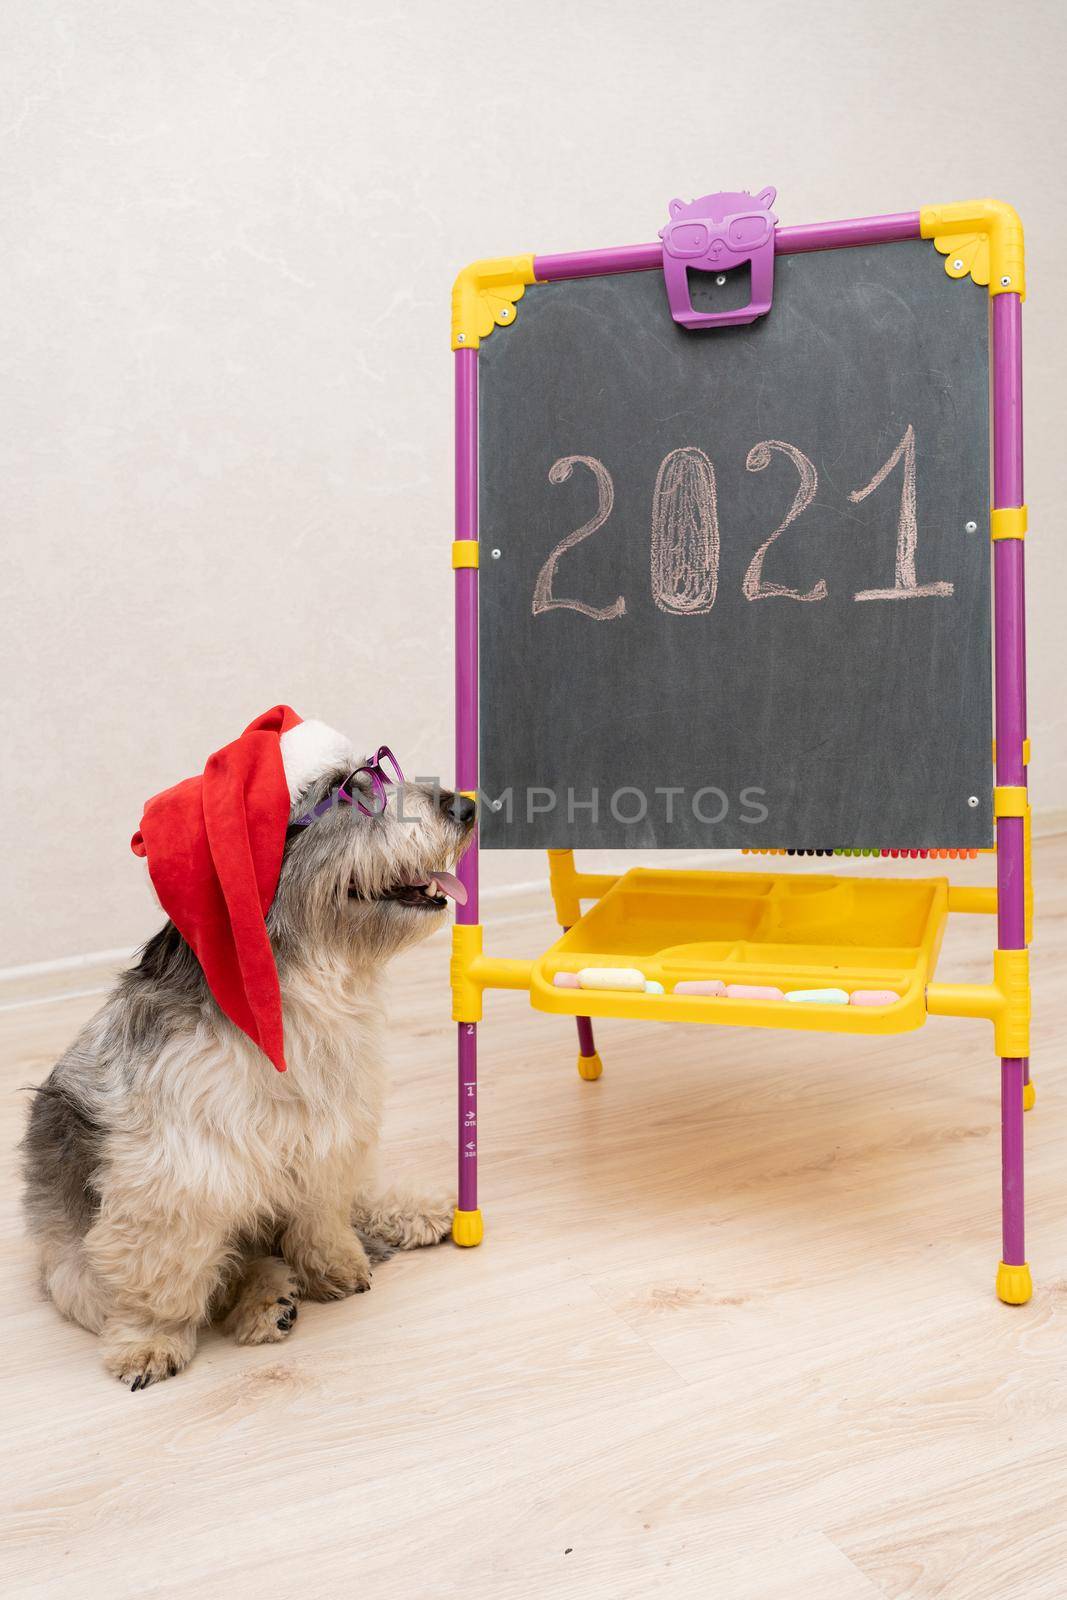 a dog in a new year's Christmas hat sits in front of a blackboard with the year 2021 written on it. Her eyes are sad. She doesn't know what to expect next year from life